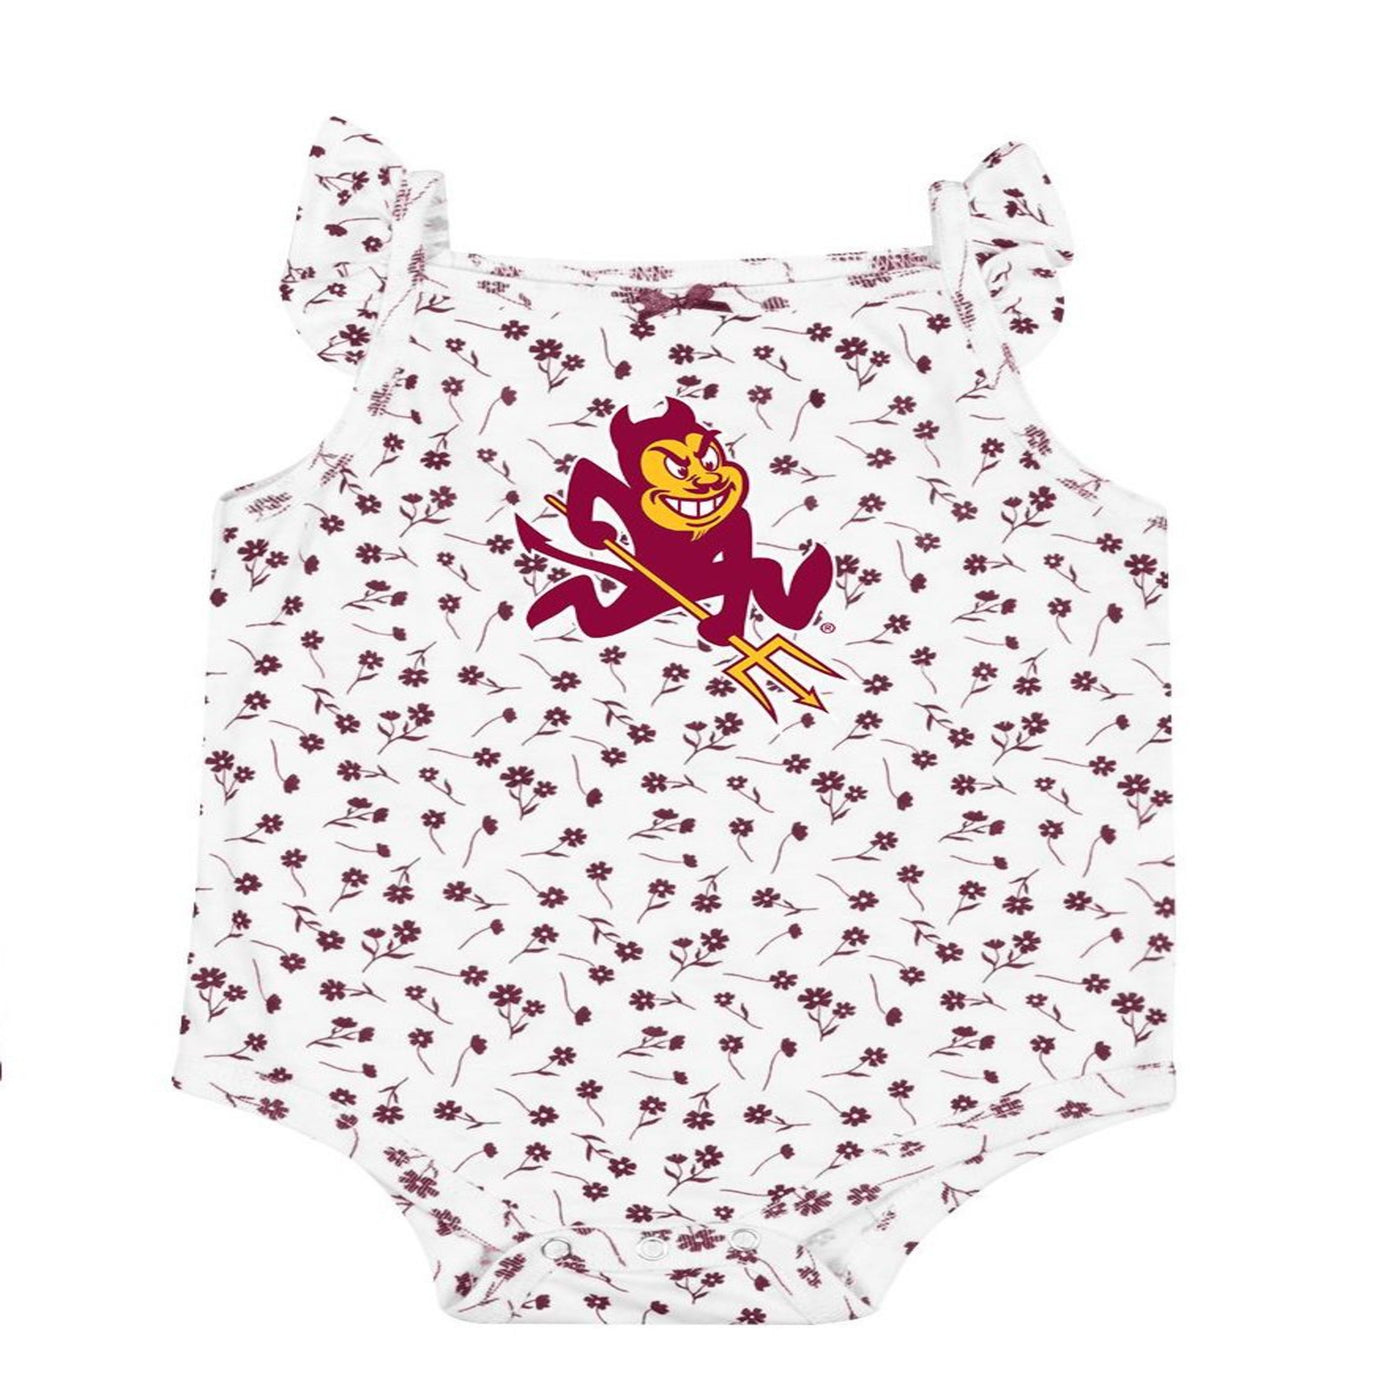 ASU white onesie covered in small maroon flowers. Sparky mascot on the front and ruffle short sleeves